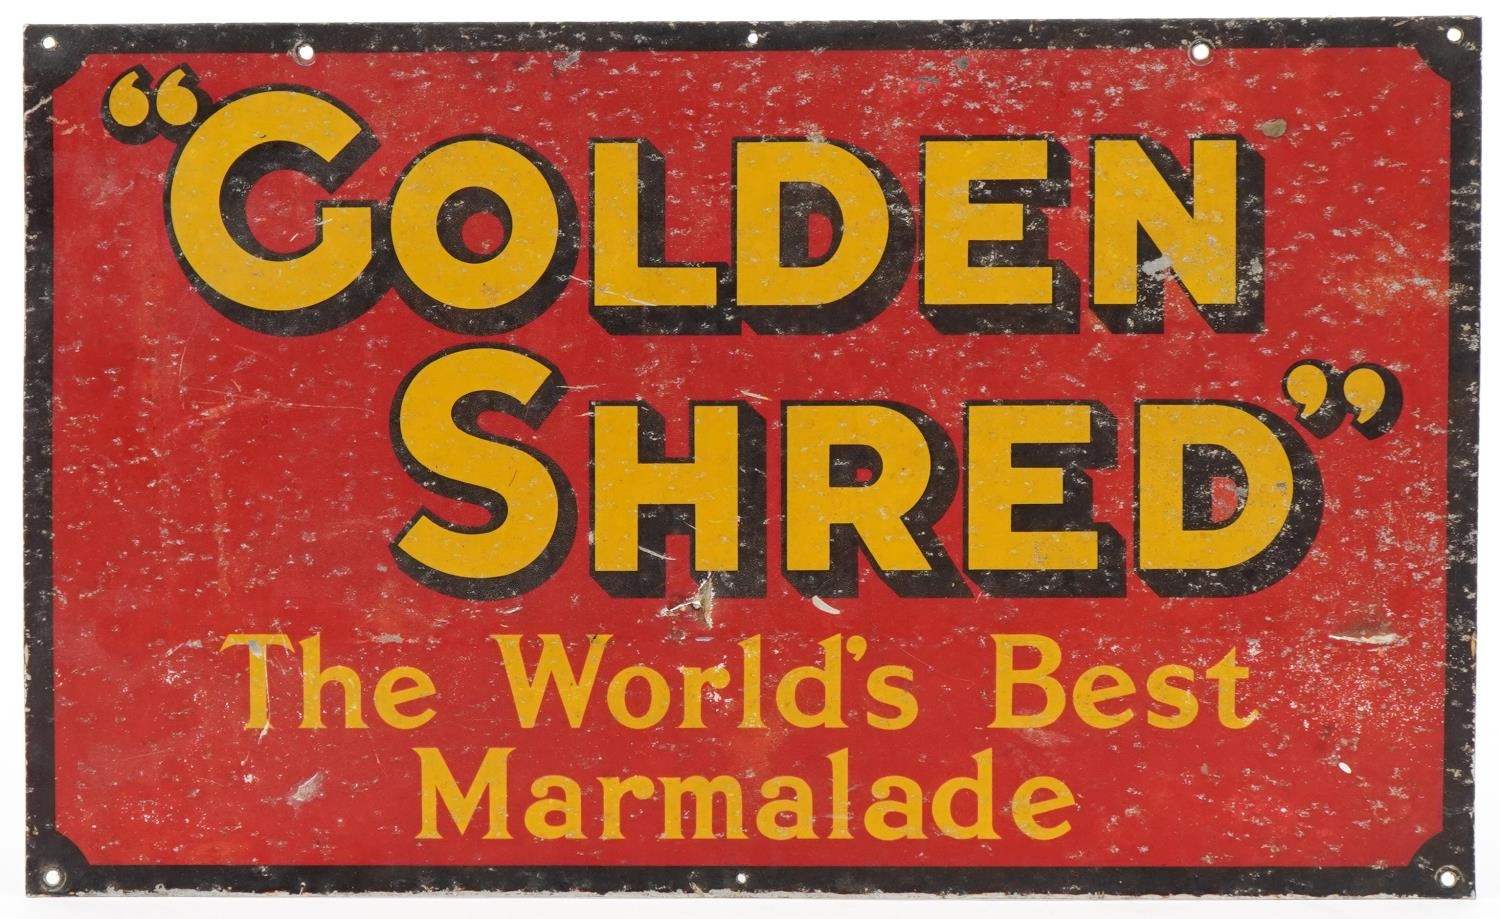 Golden Shred the World's Best Marmalade tin advertising wall sign, 38cm x 23cm